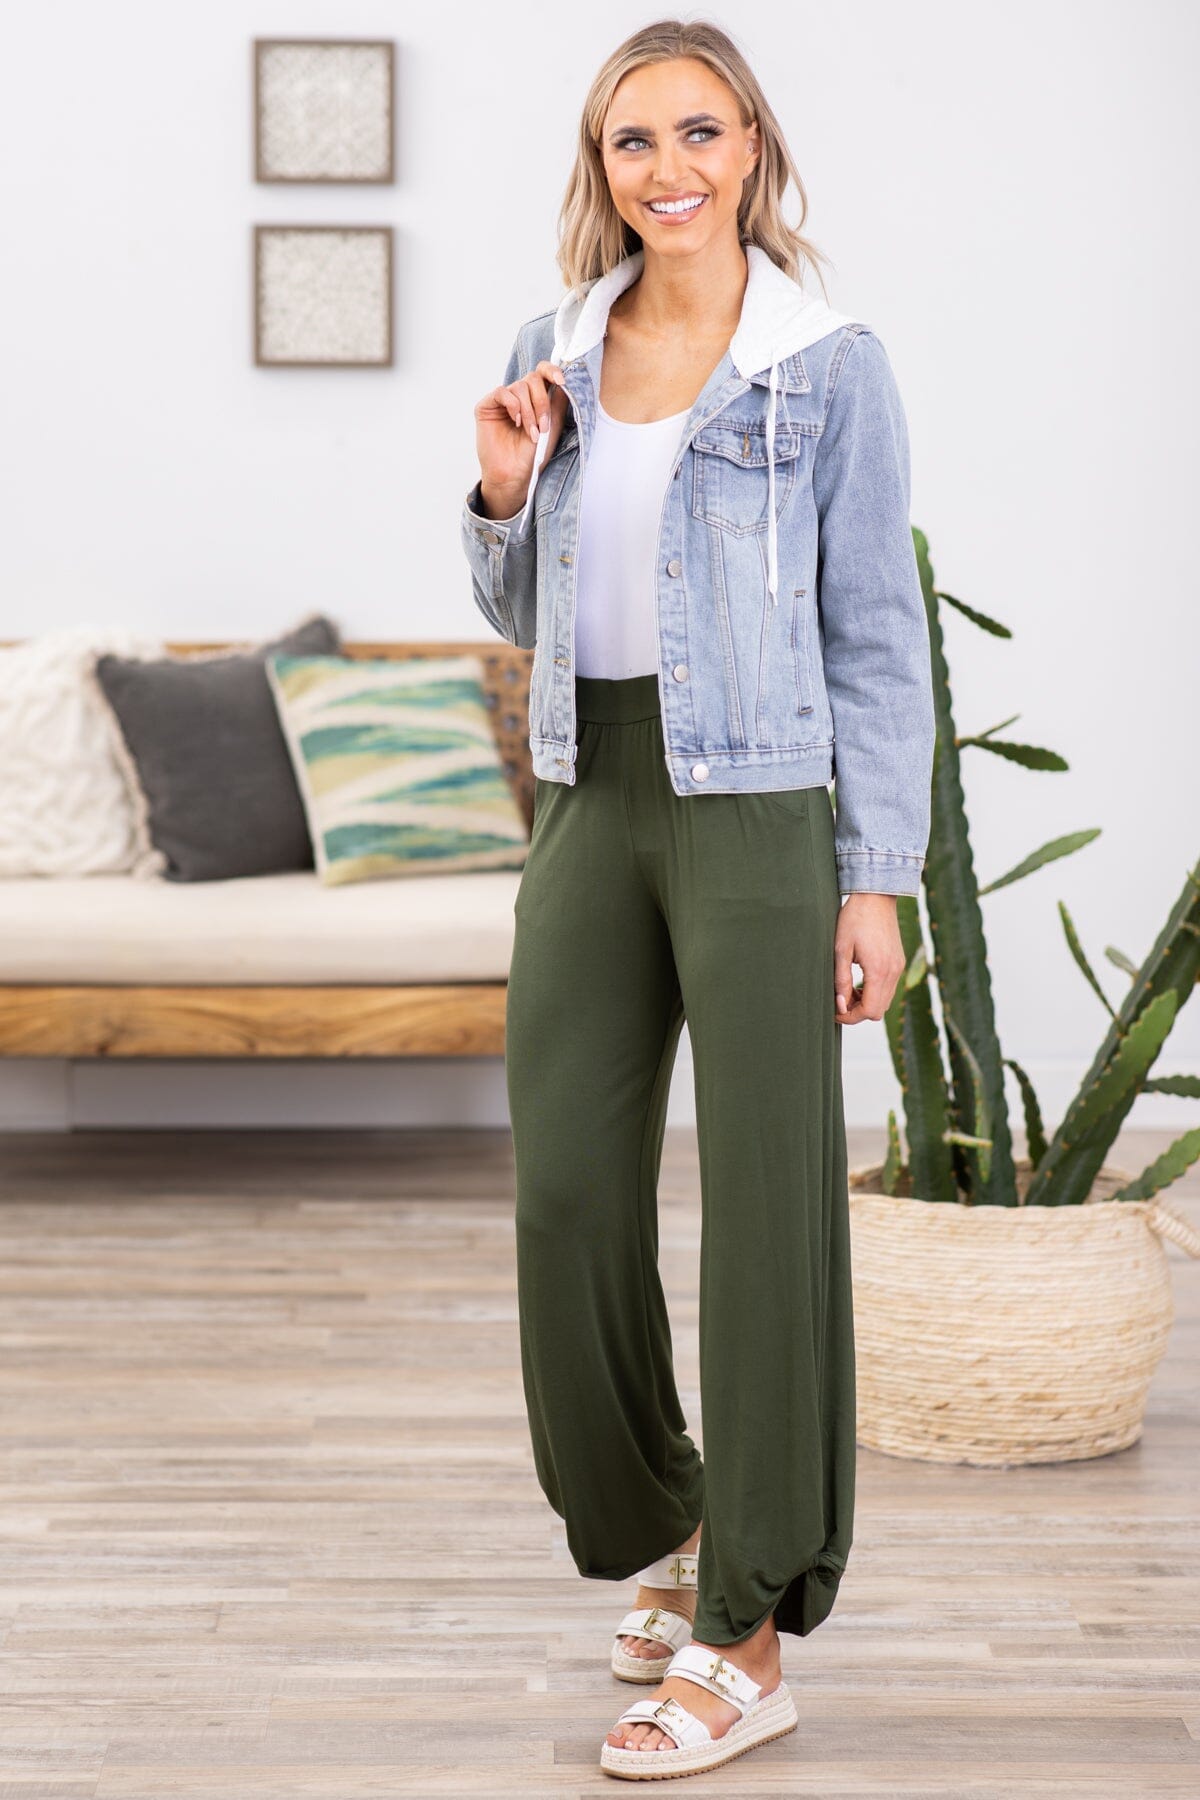 What to Wear With Olive Green Pants This Fall  Olive green pants, Olive  green pants outfit, Outfits with leggings